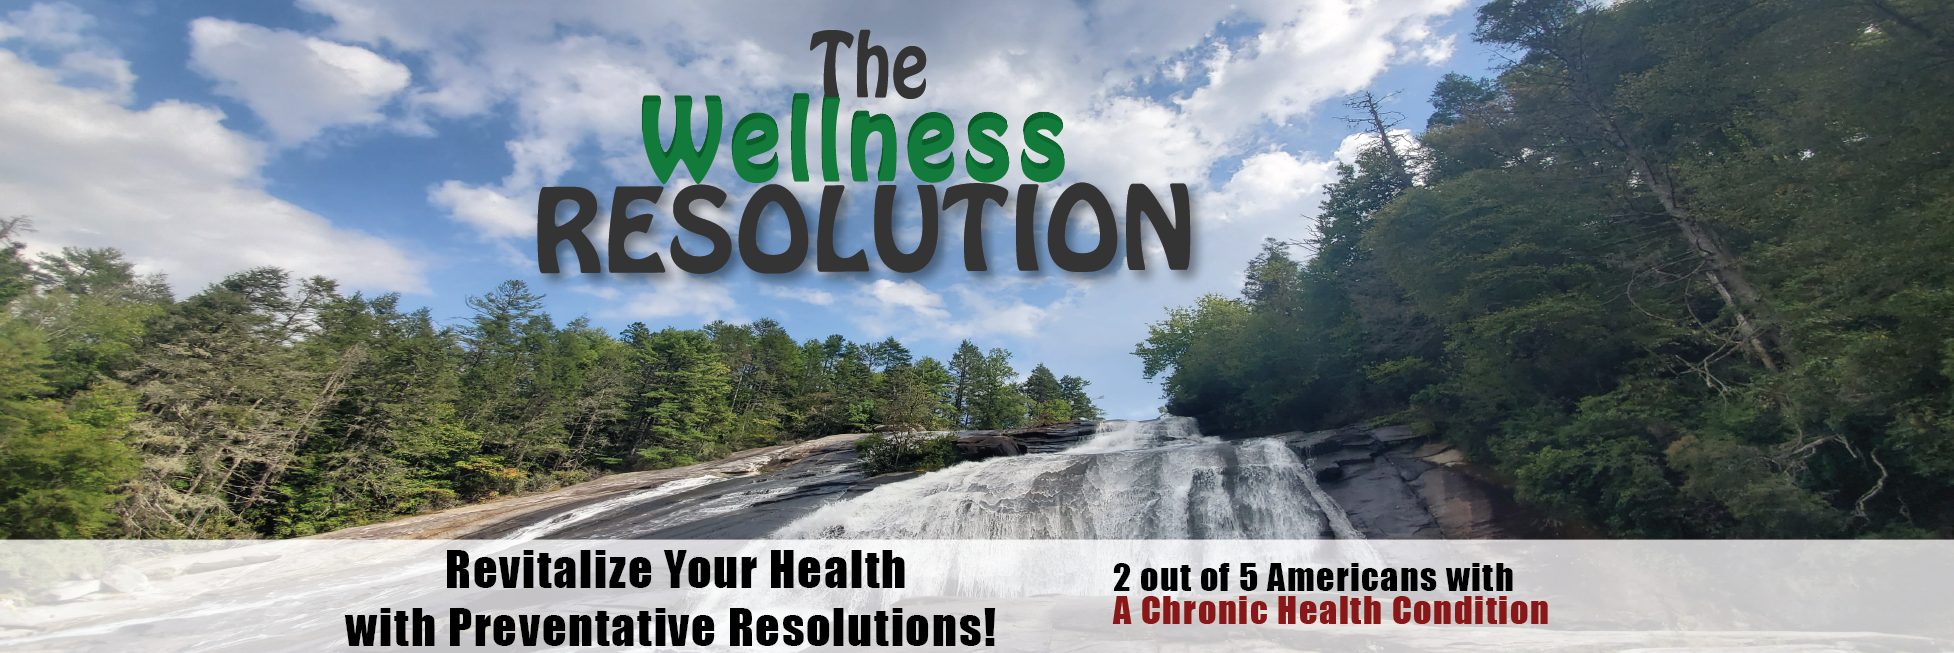 The Wellness Resolution a blog that is about revitalizing your health to prevent chronic health conditions with 40-45% of Americans having one.